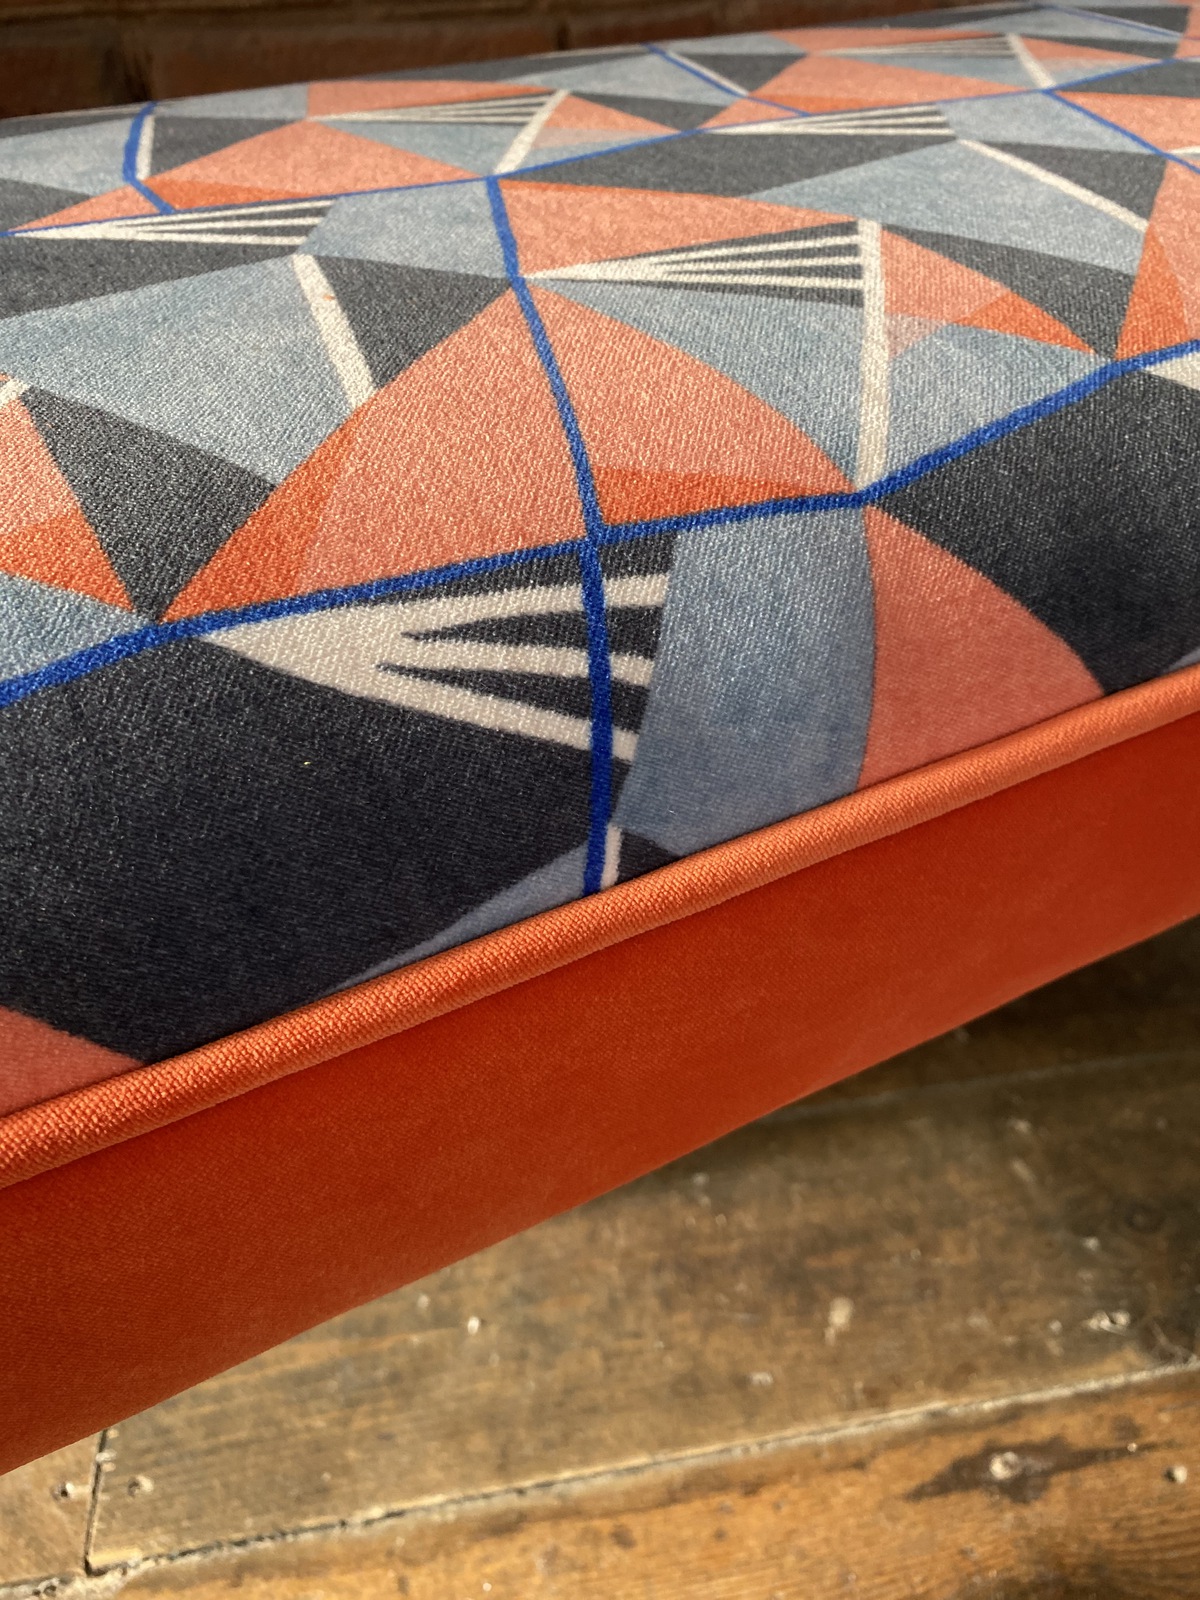 Single piping on patterned bench